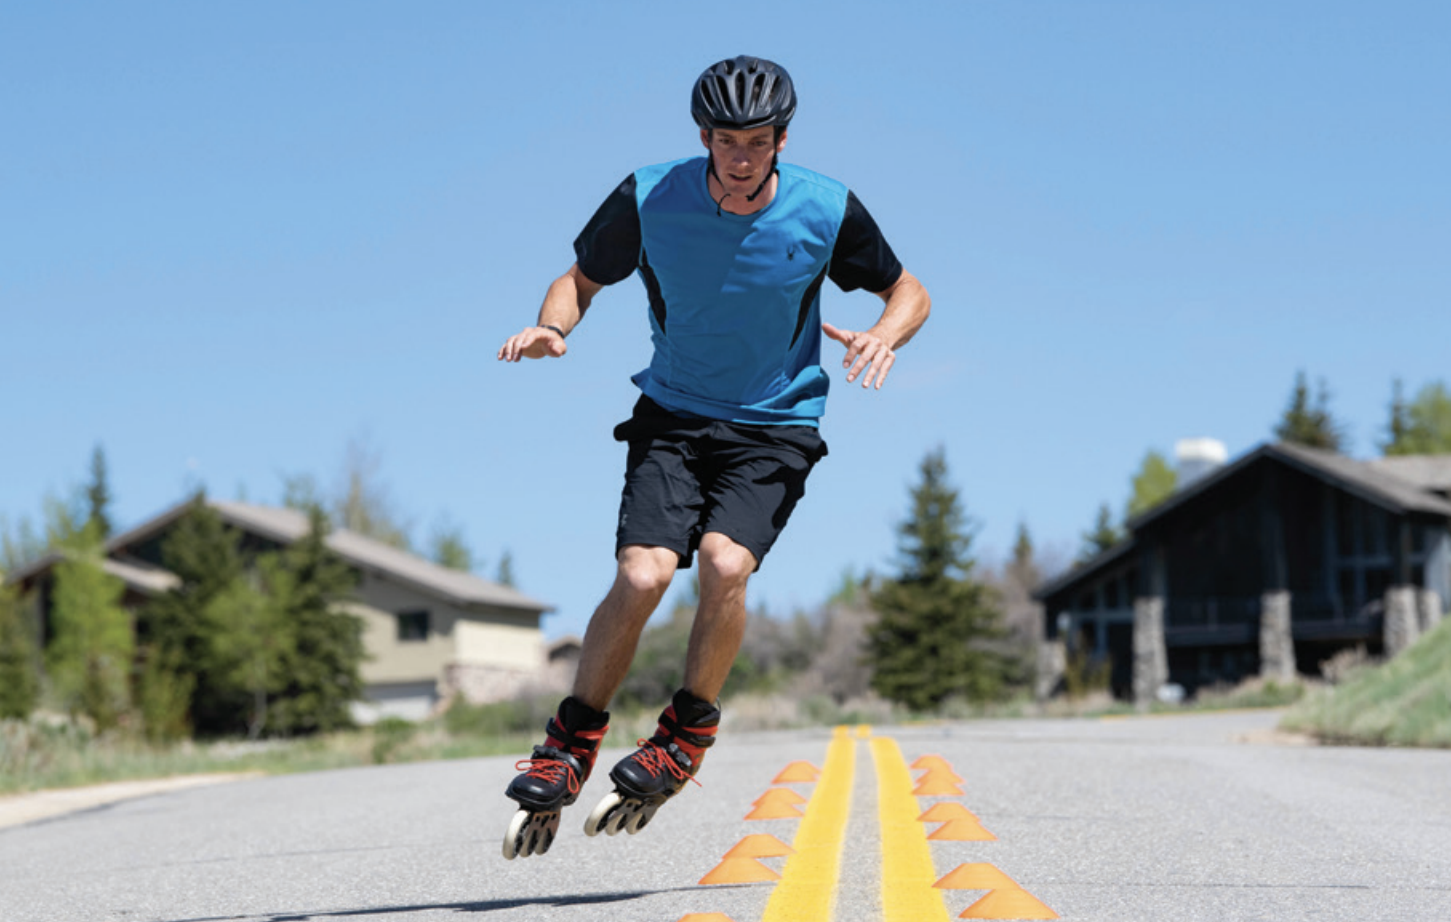 PHASE 4 of Skate to Ski by Rollerblade: Power Up Your Skills! (Part5)